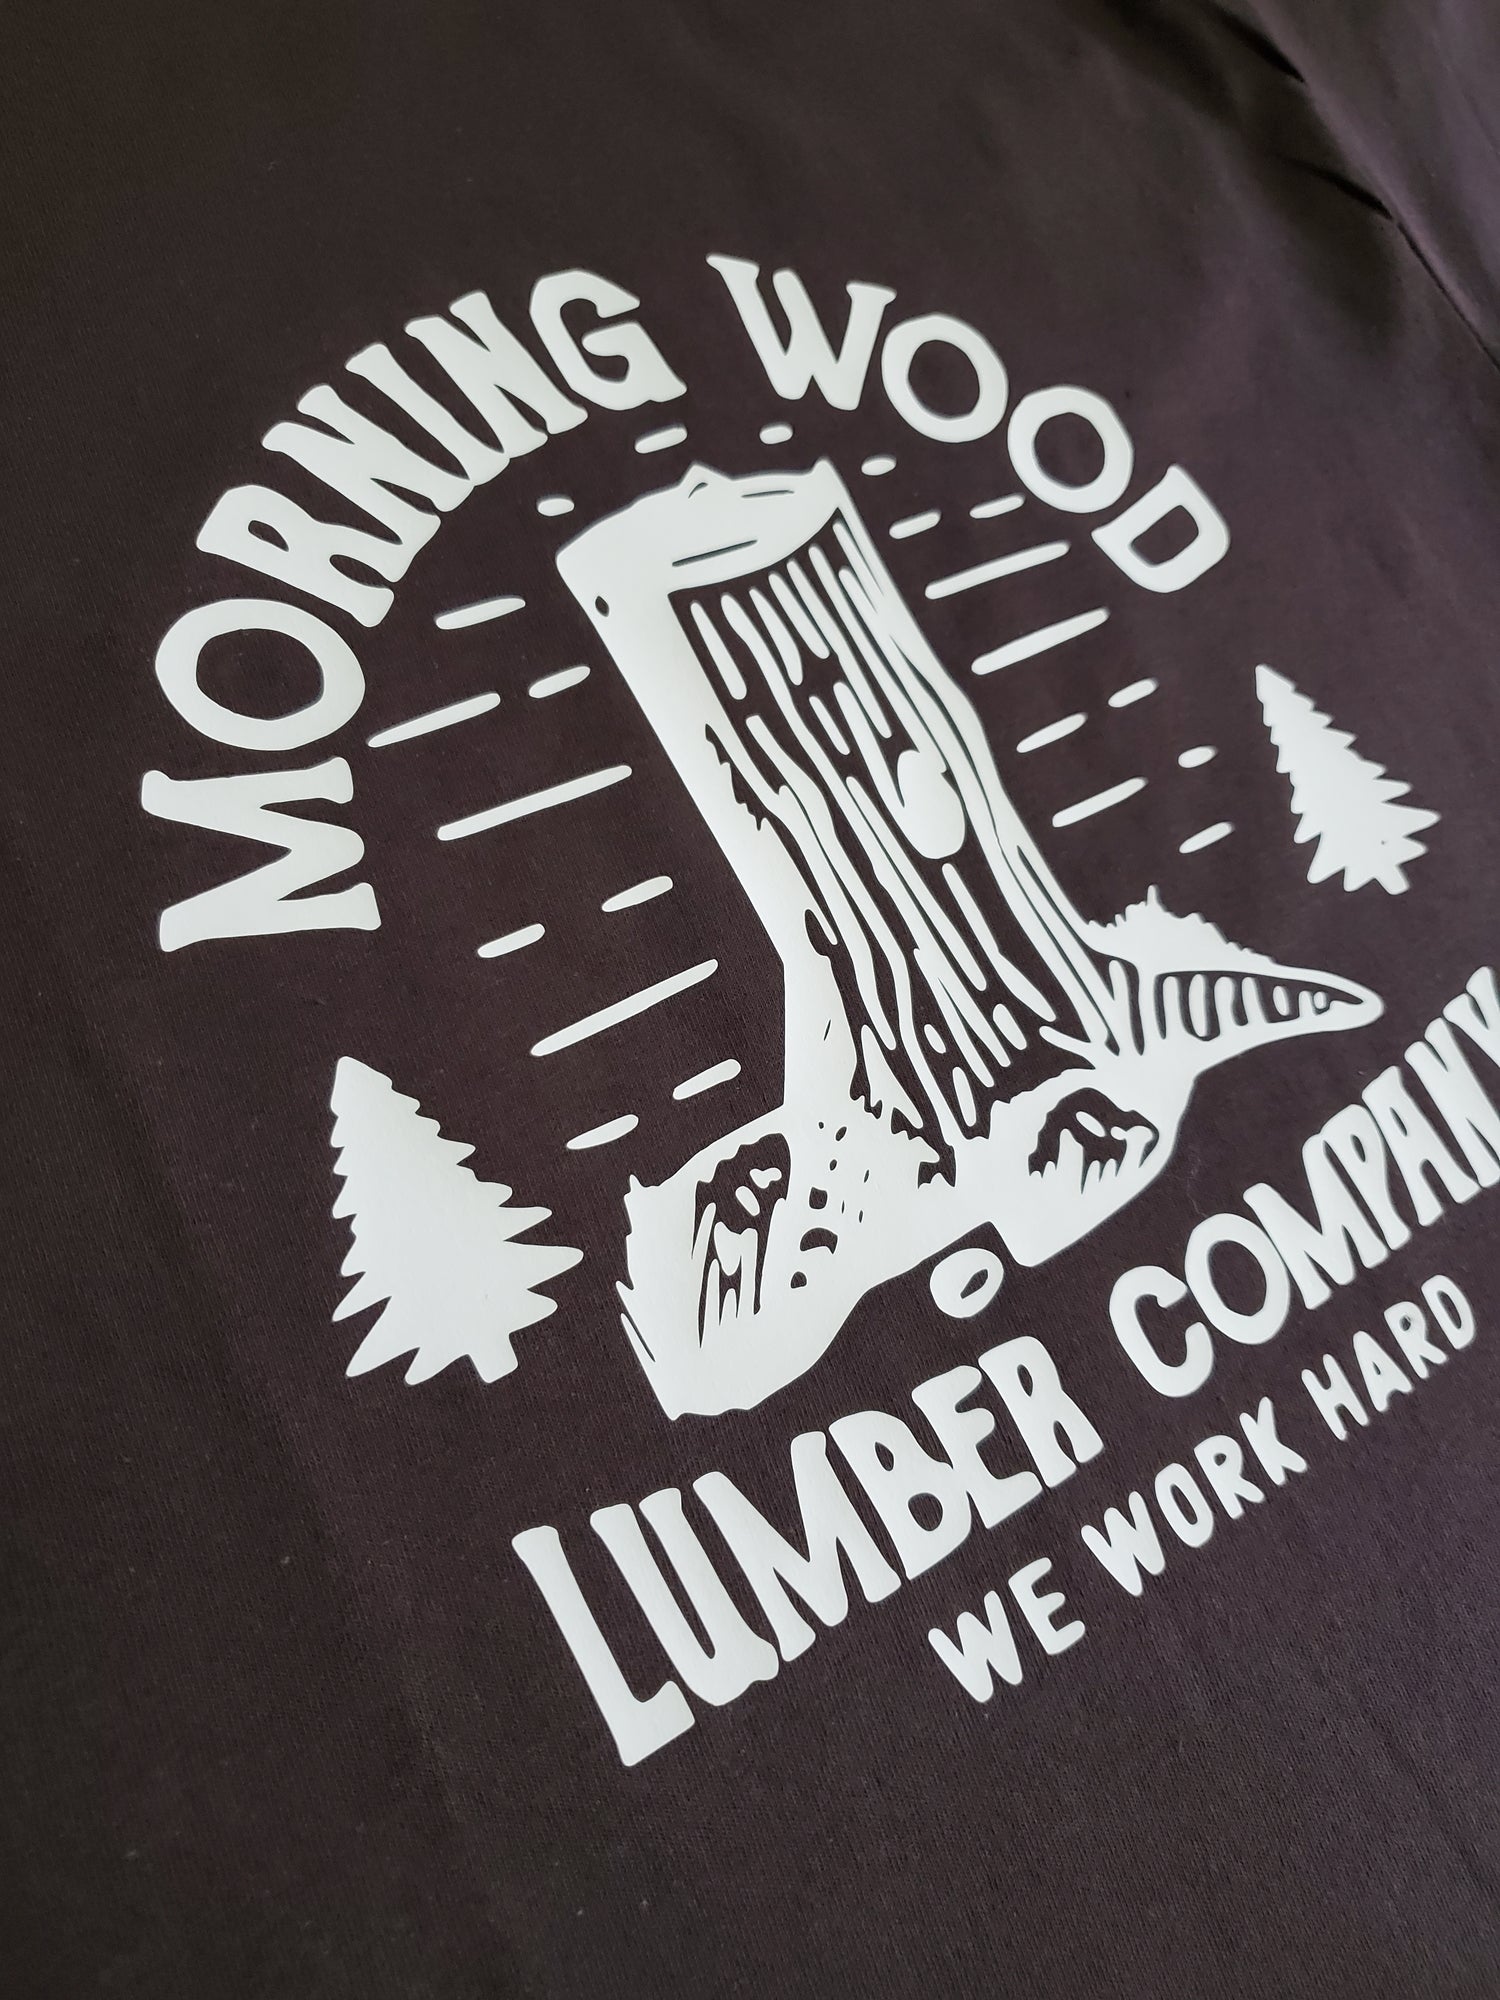 Morning Wood T-Shirt - Centre Ave Clothing Co.